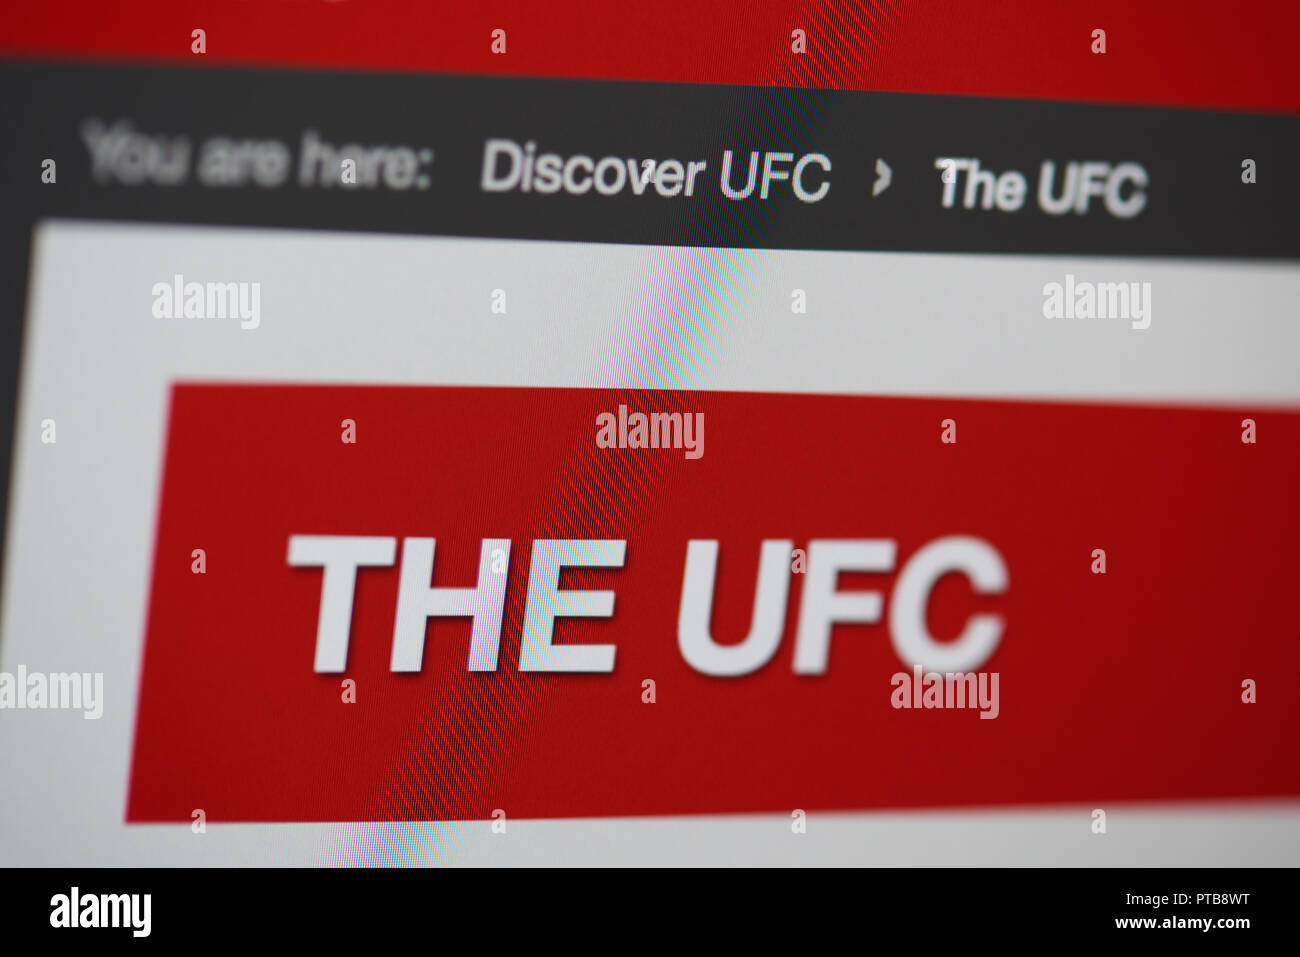 New york, USA - october 8, 2018: Discover UFC home page on laptop screen close up view Stock Photo